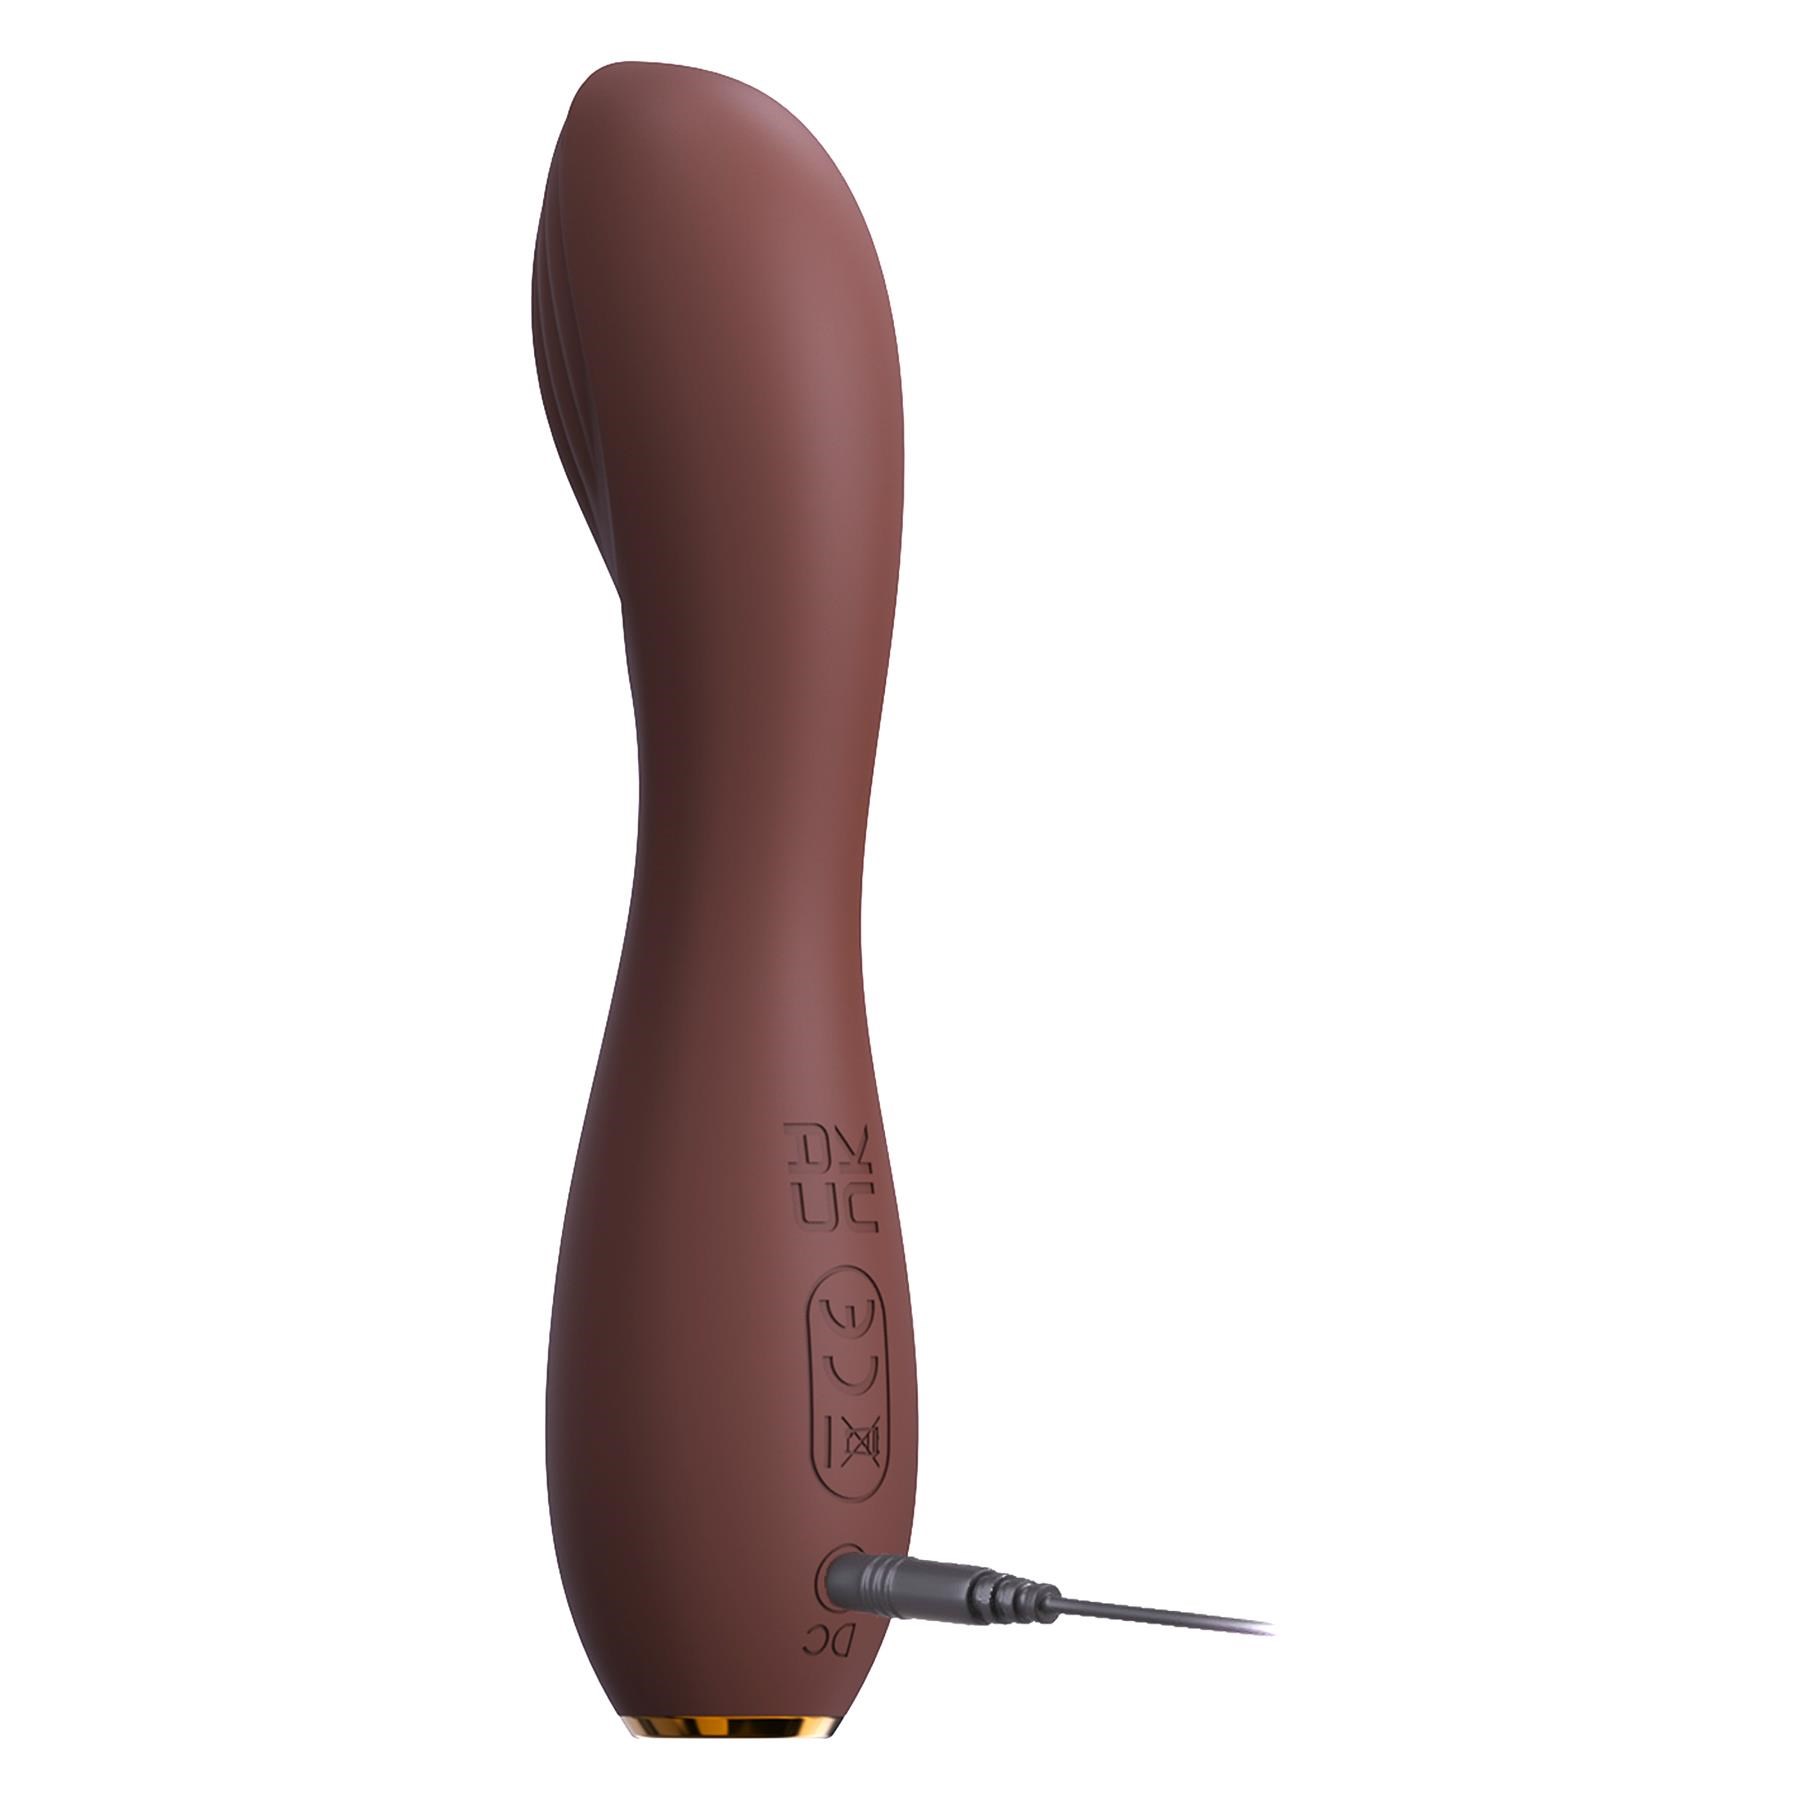 Sable Seduction Bendable Vibrator - Showing Where Charging Cable is Placed